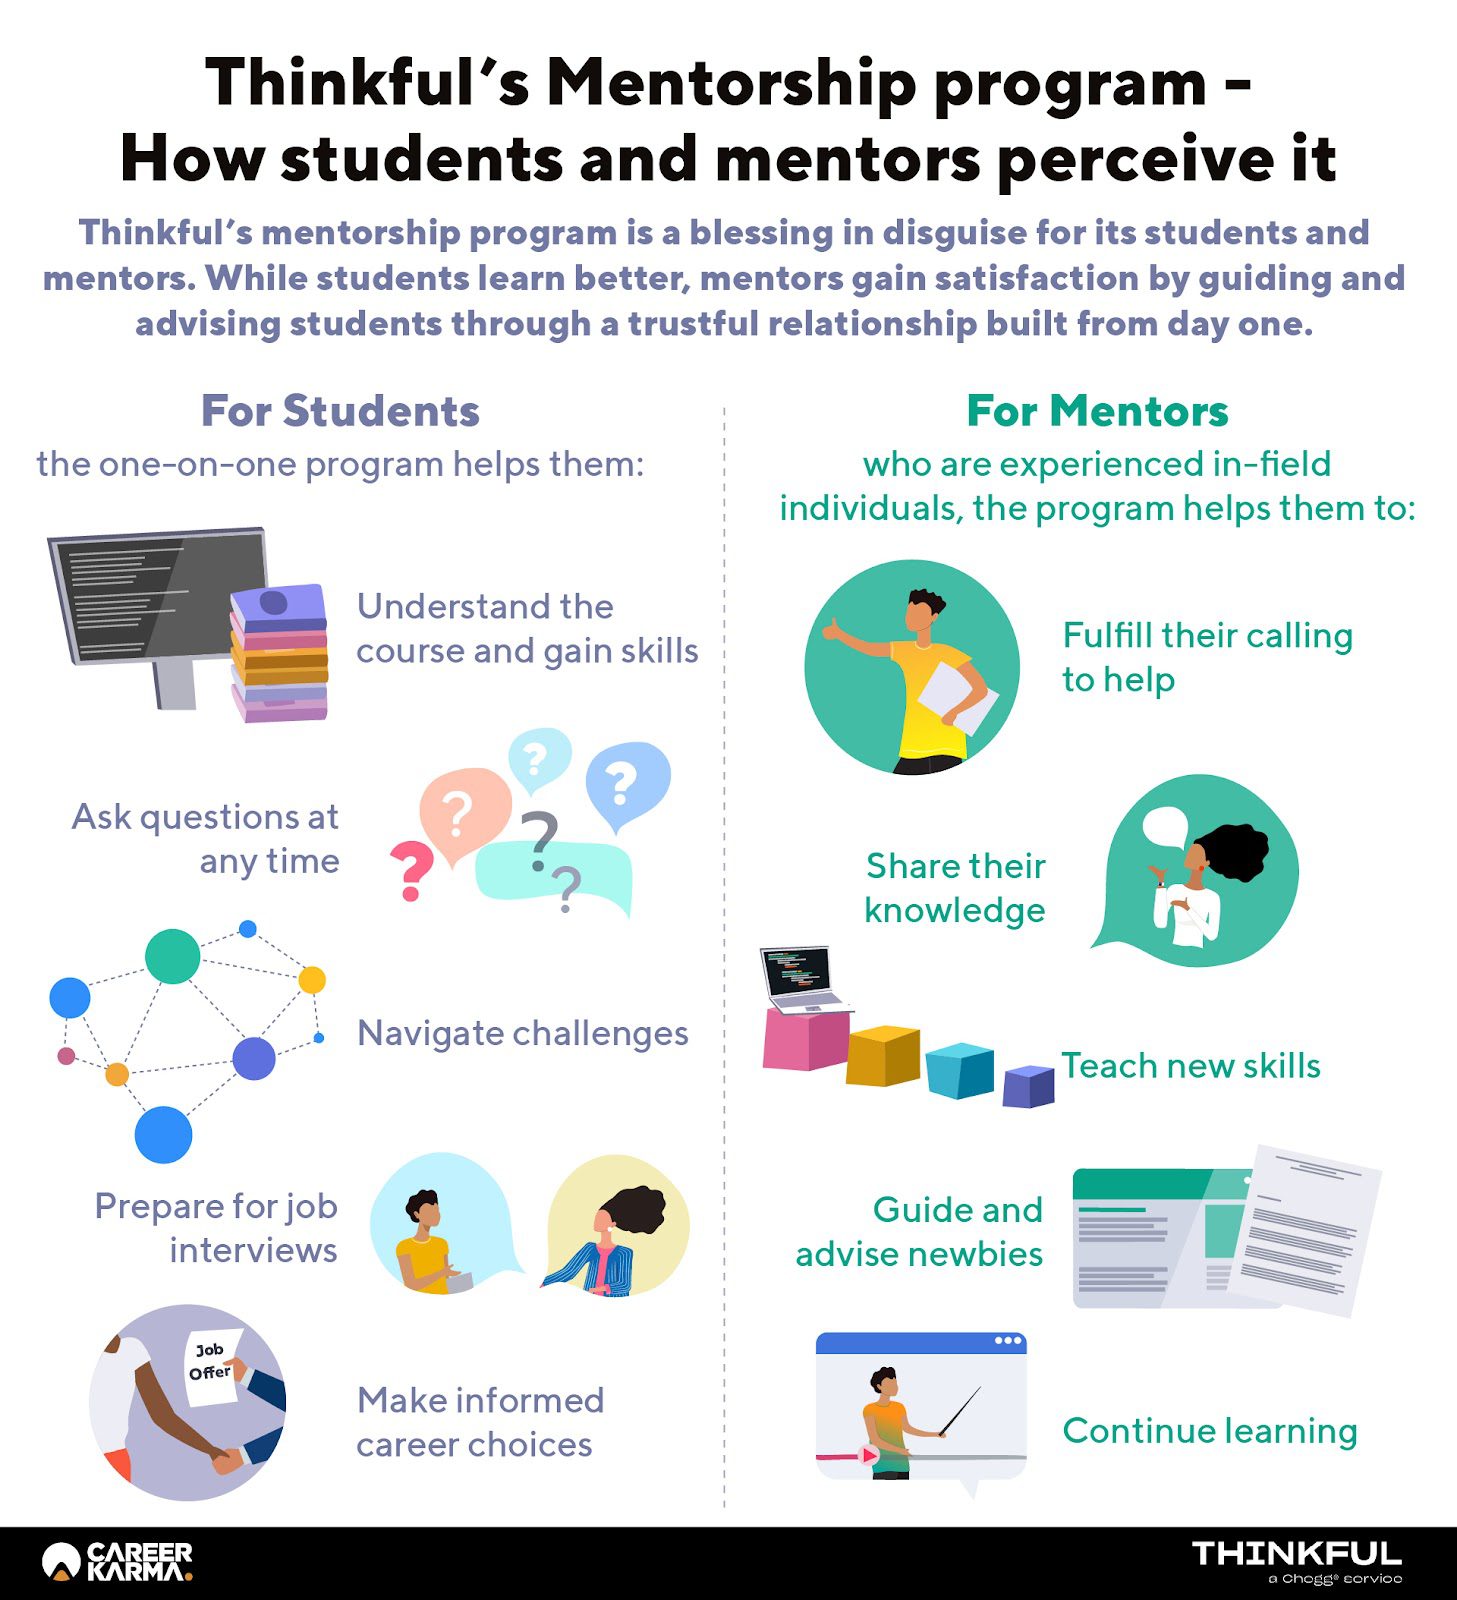 An infographic showing the benefits of Thinkful’s mentorship program